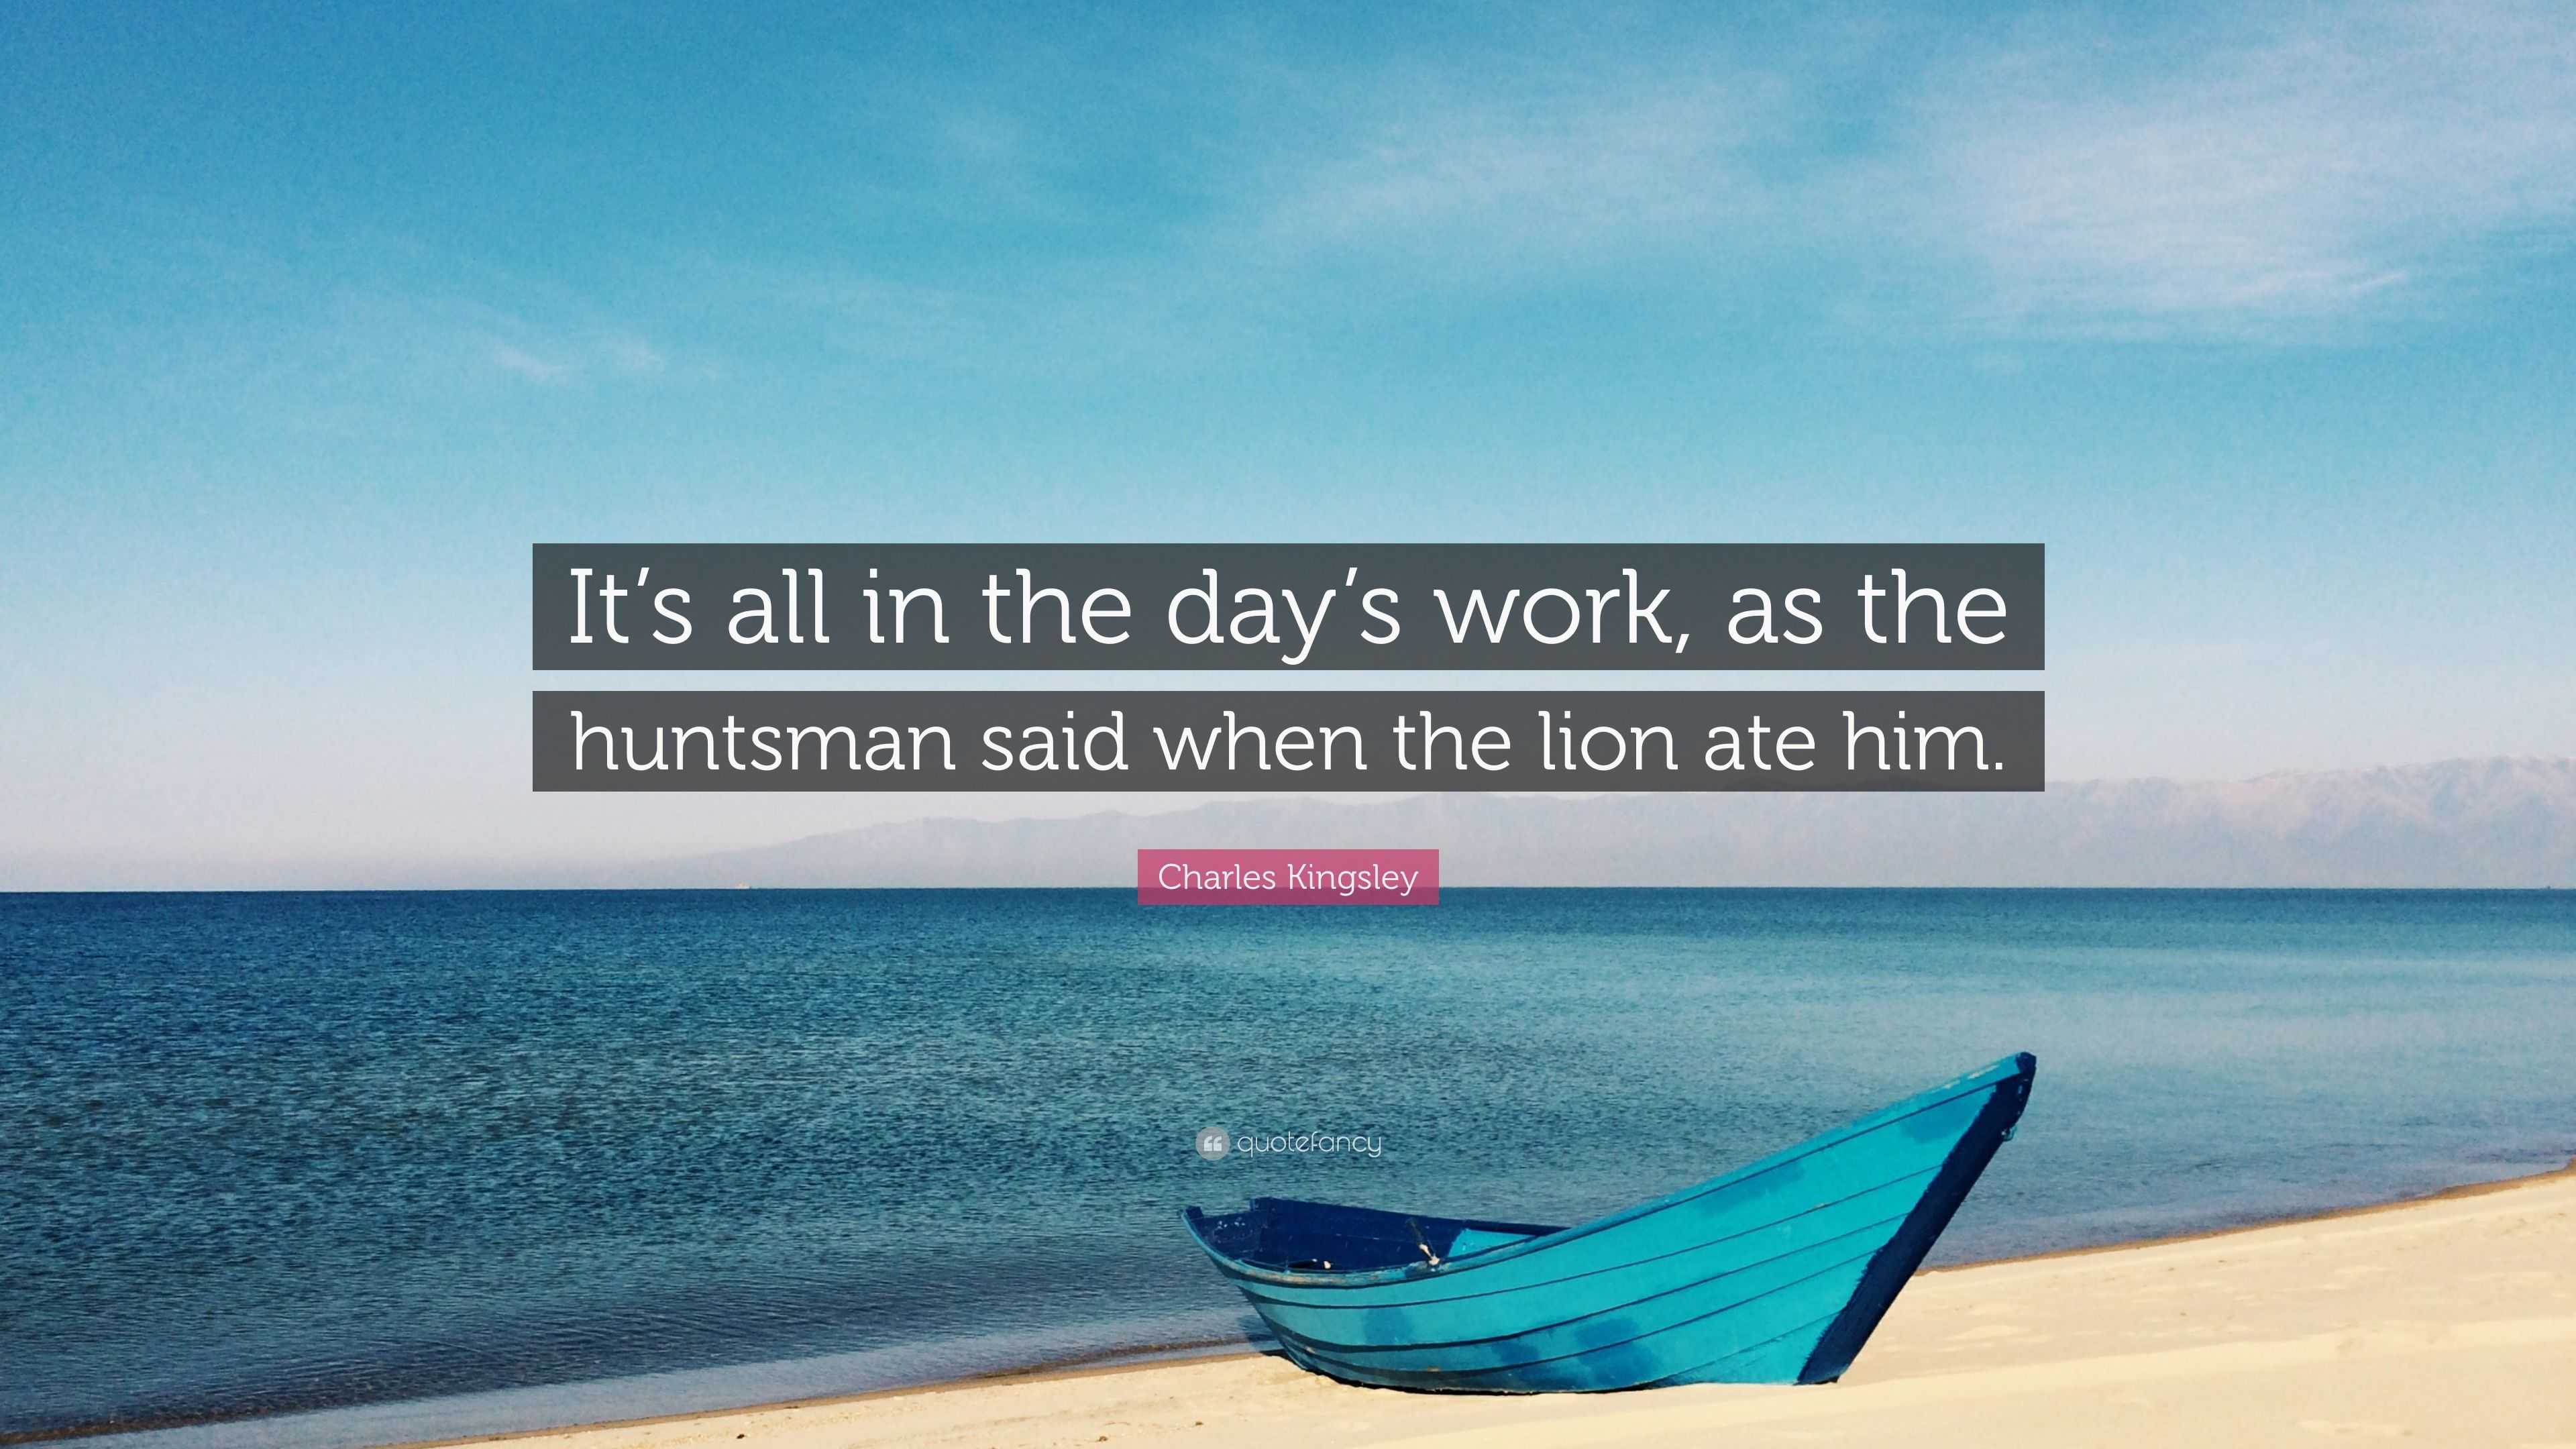 Charles Kingsley Quote: “It's All In The Day's Work, As The Huntsman Said When The Lion